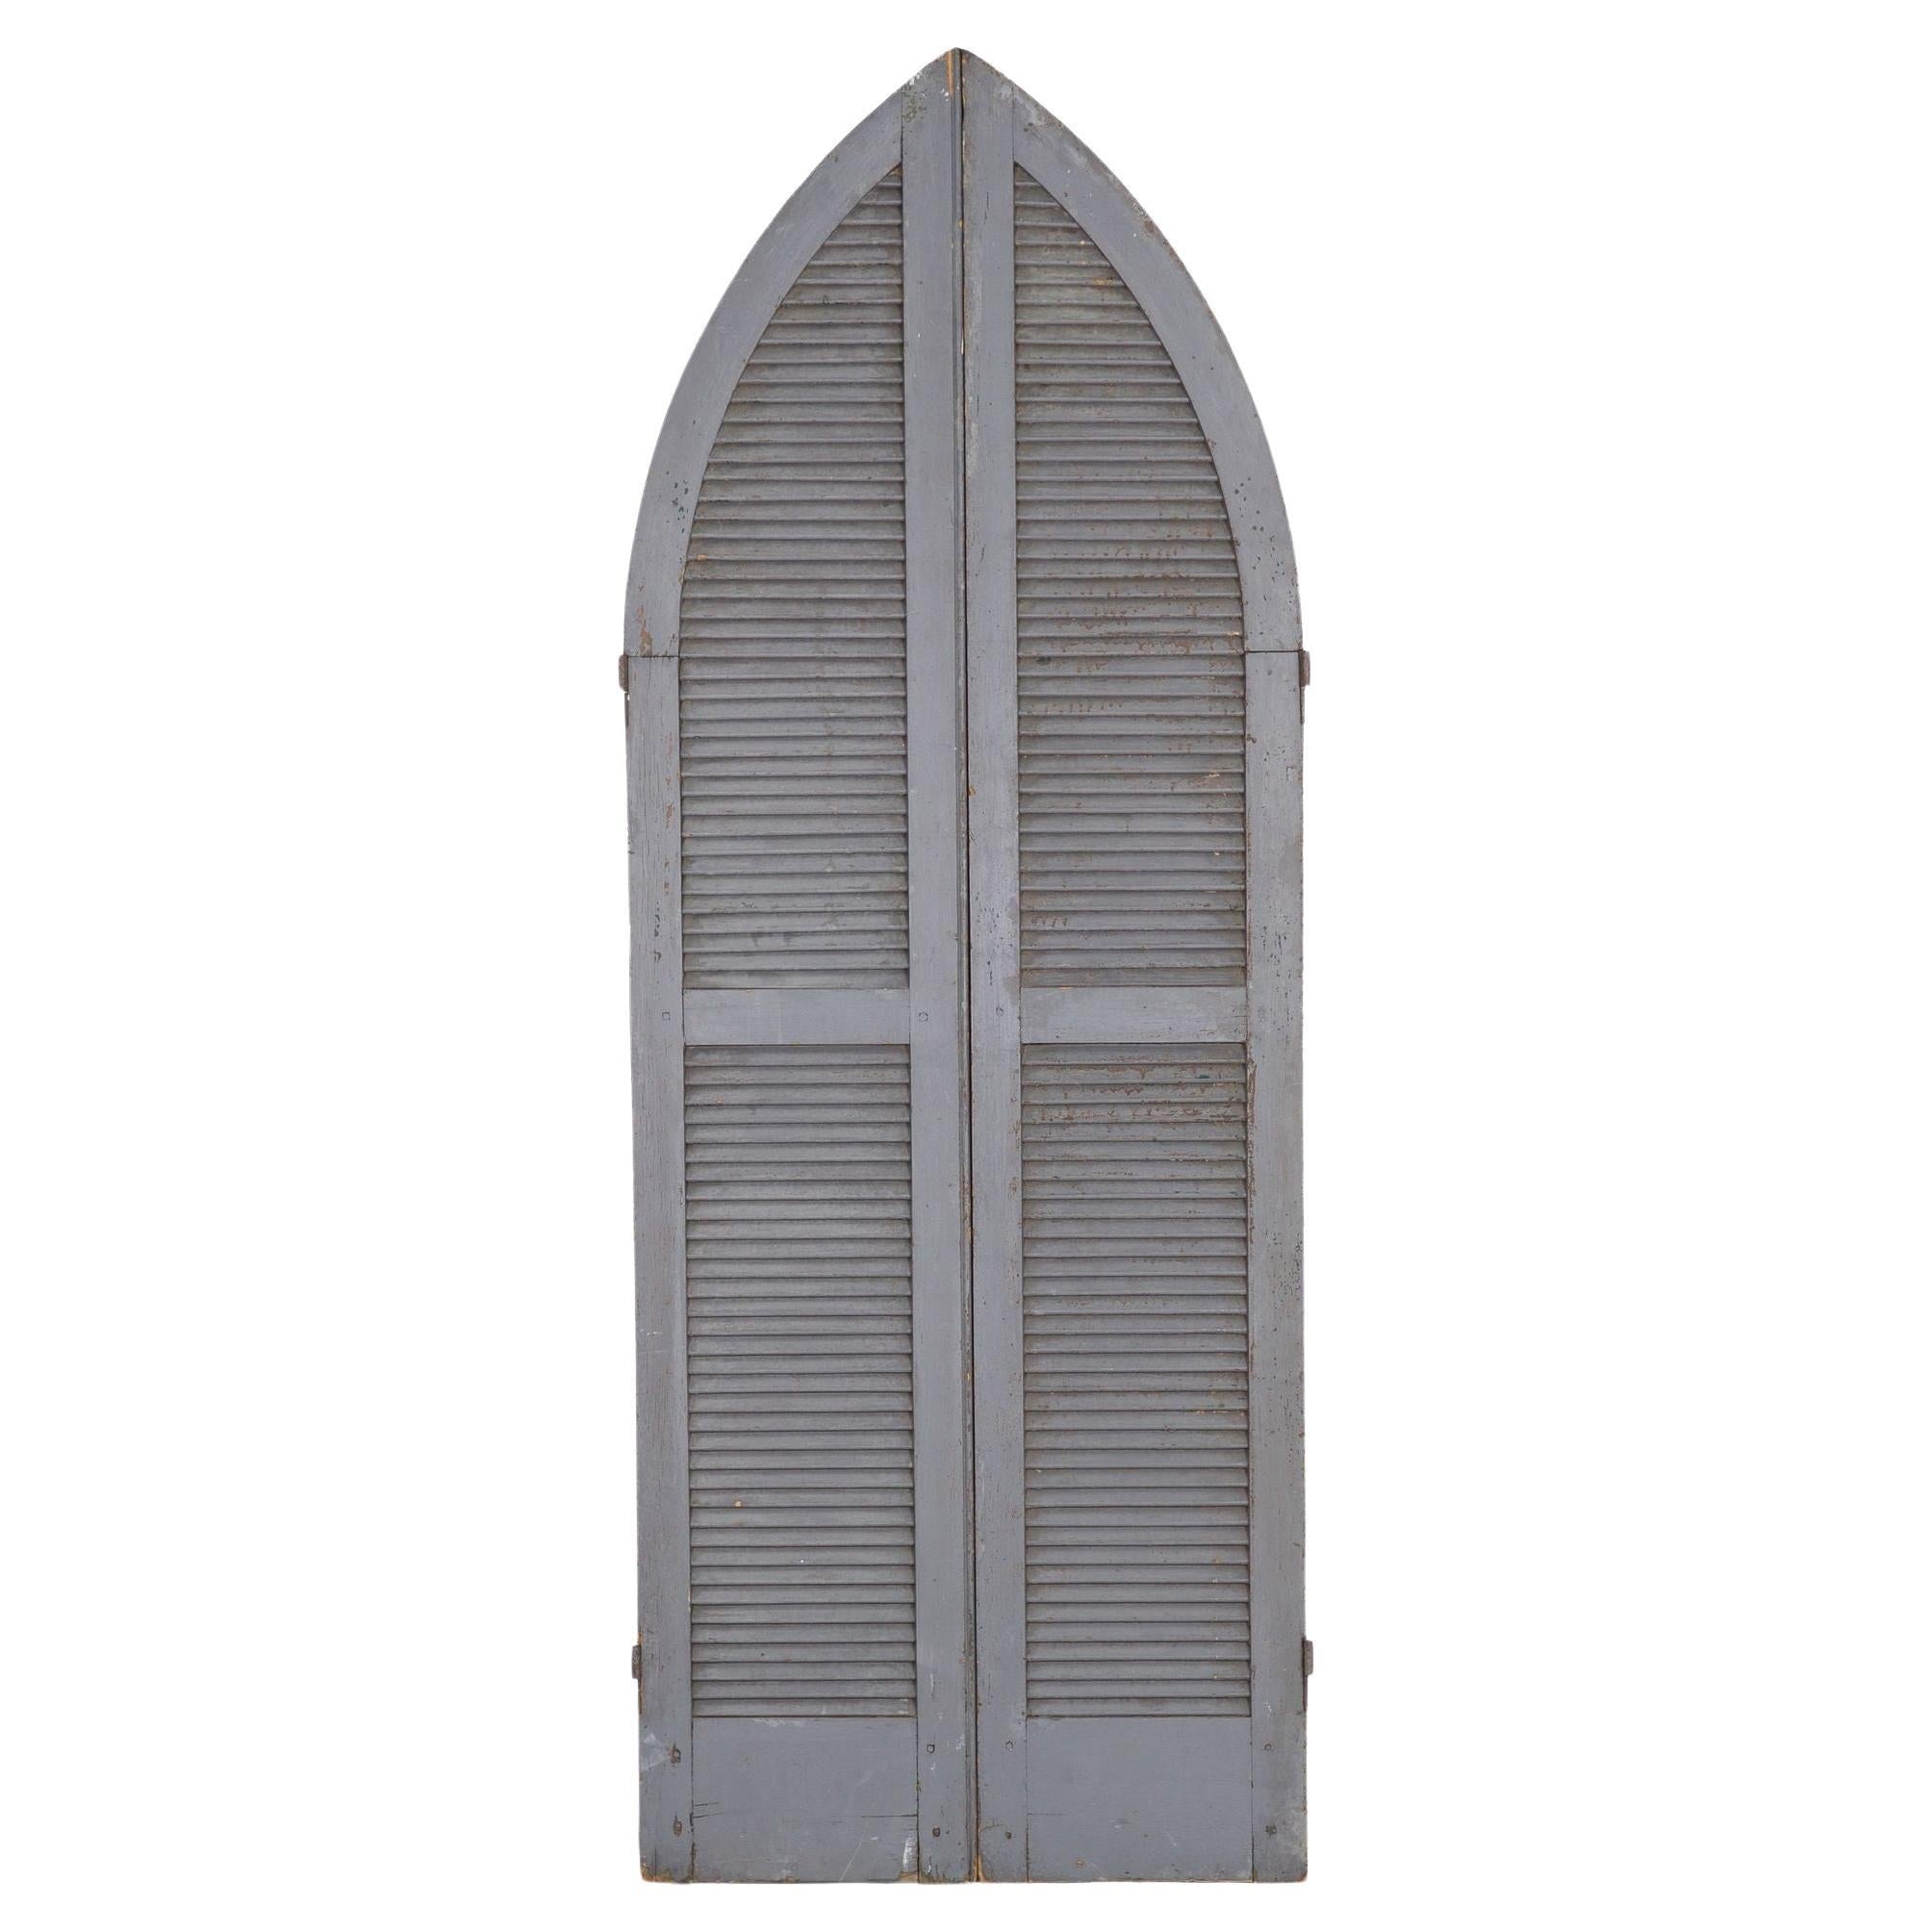 Pair of Weathered Gray-Painted Arched Domed Louvered Doors